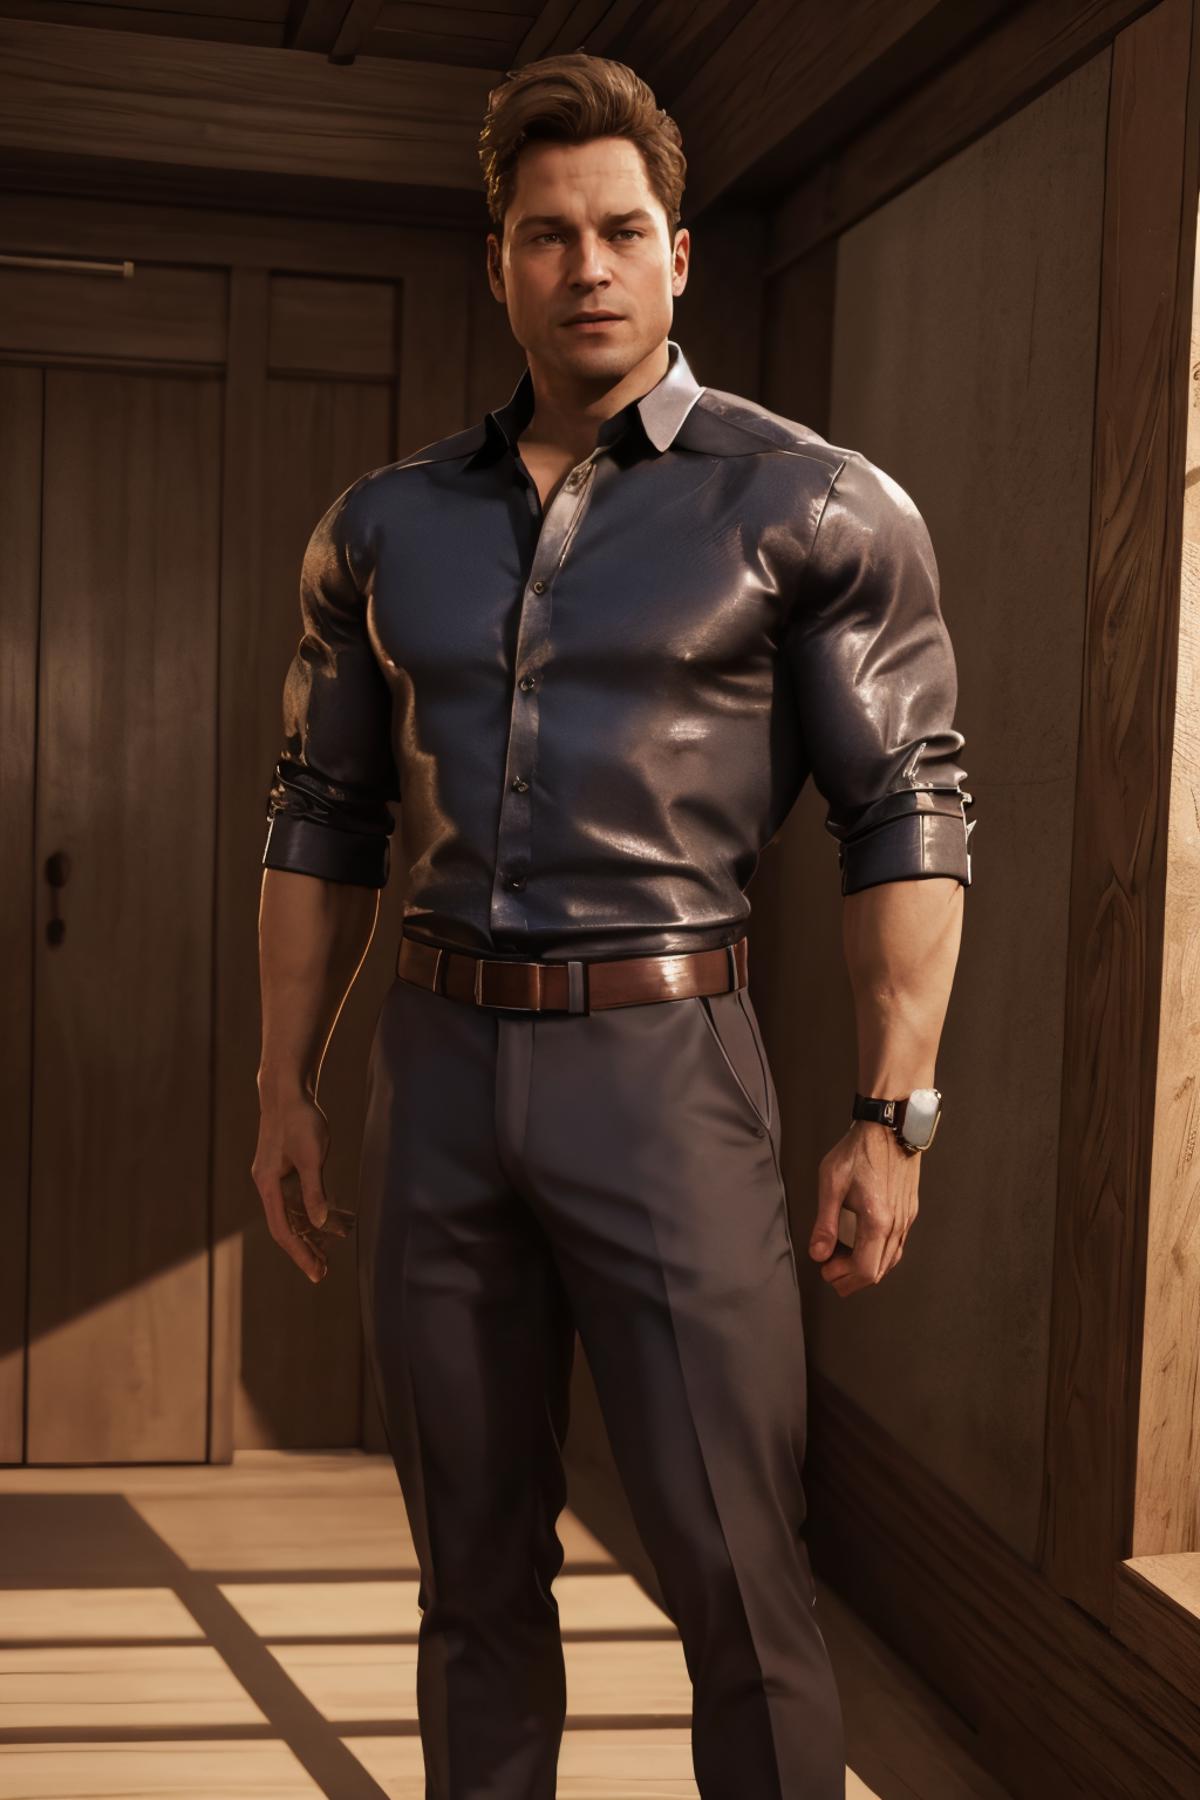 Johnny Cage (MK1) image by no_name000